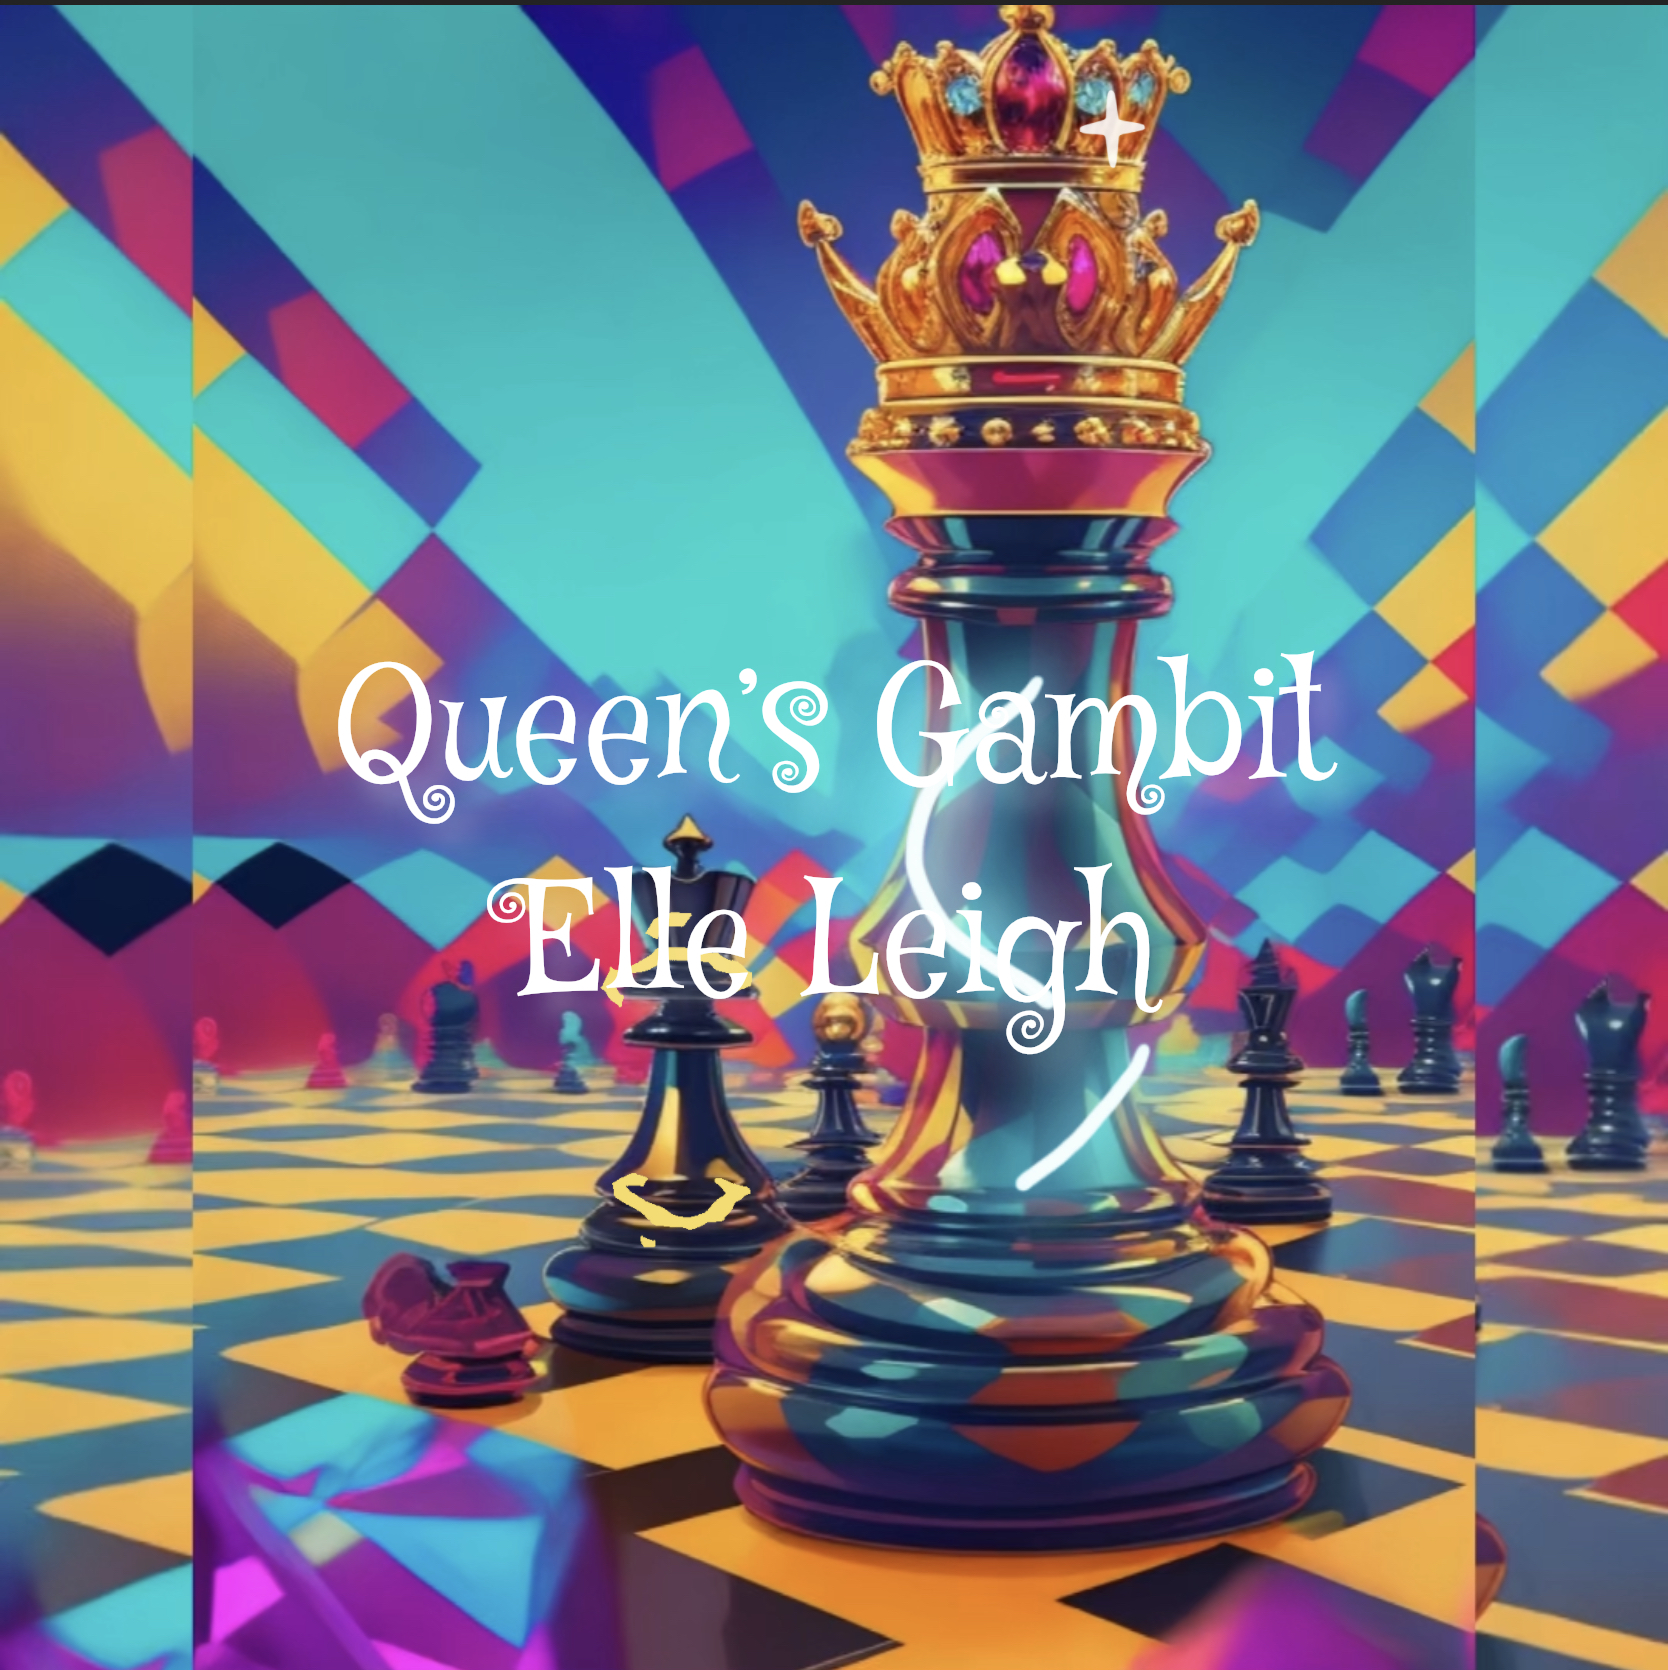 Art for Queen's Gambit by Elle Leigh